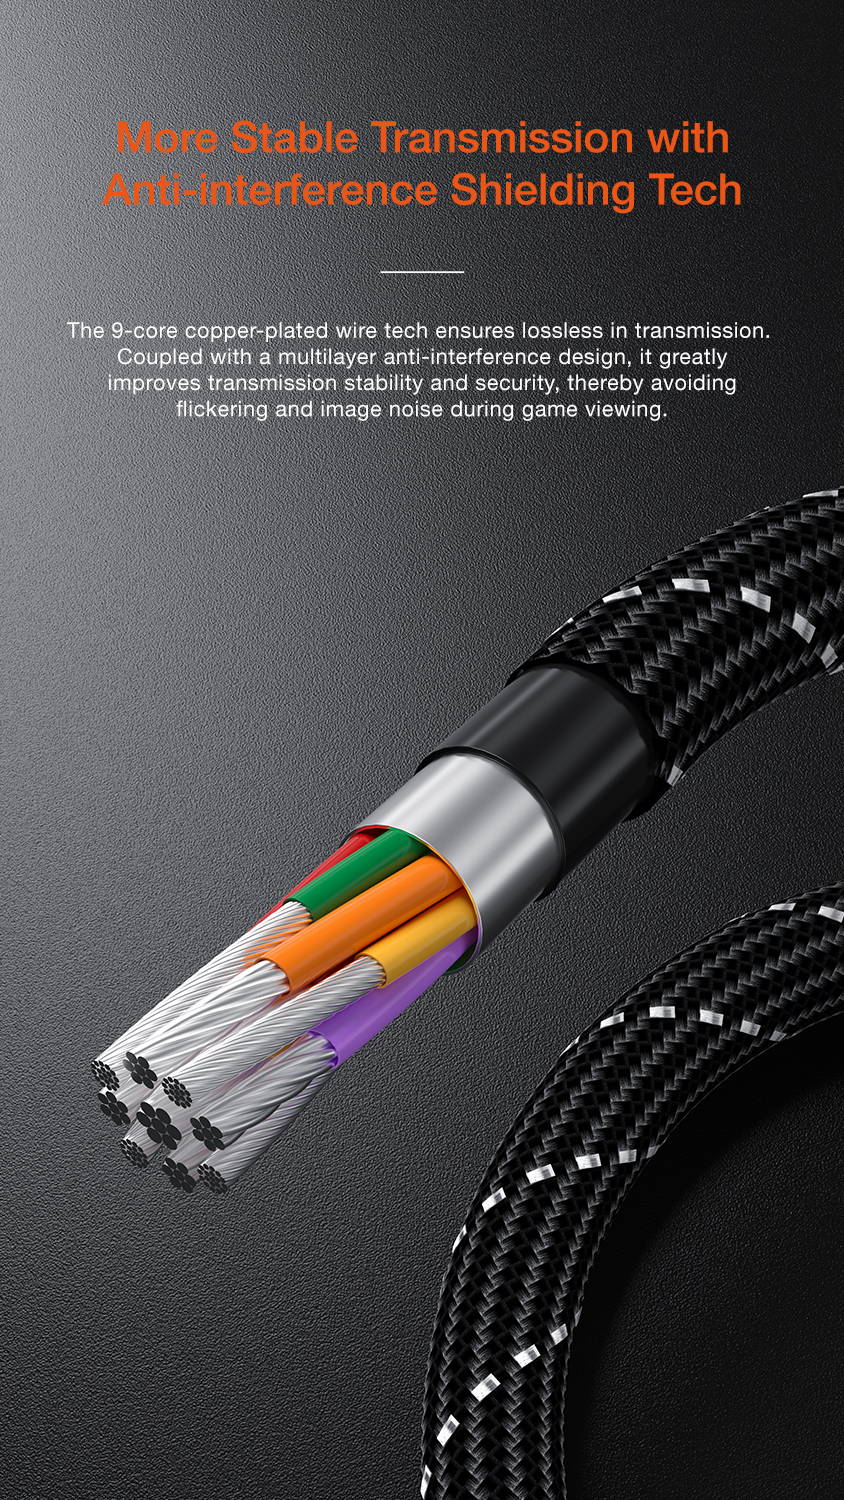 bigbig won usb 3.2 usb c type c link cable 9-core copper-plated wire tech ensures more stable transmission